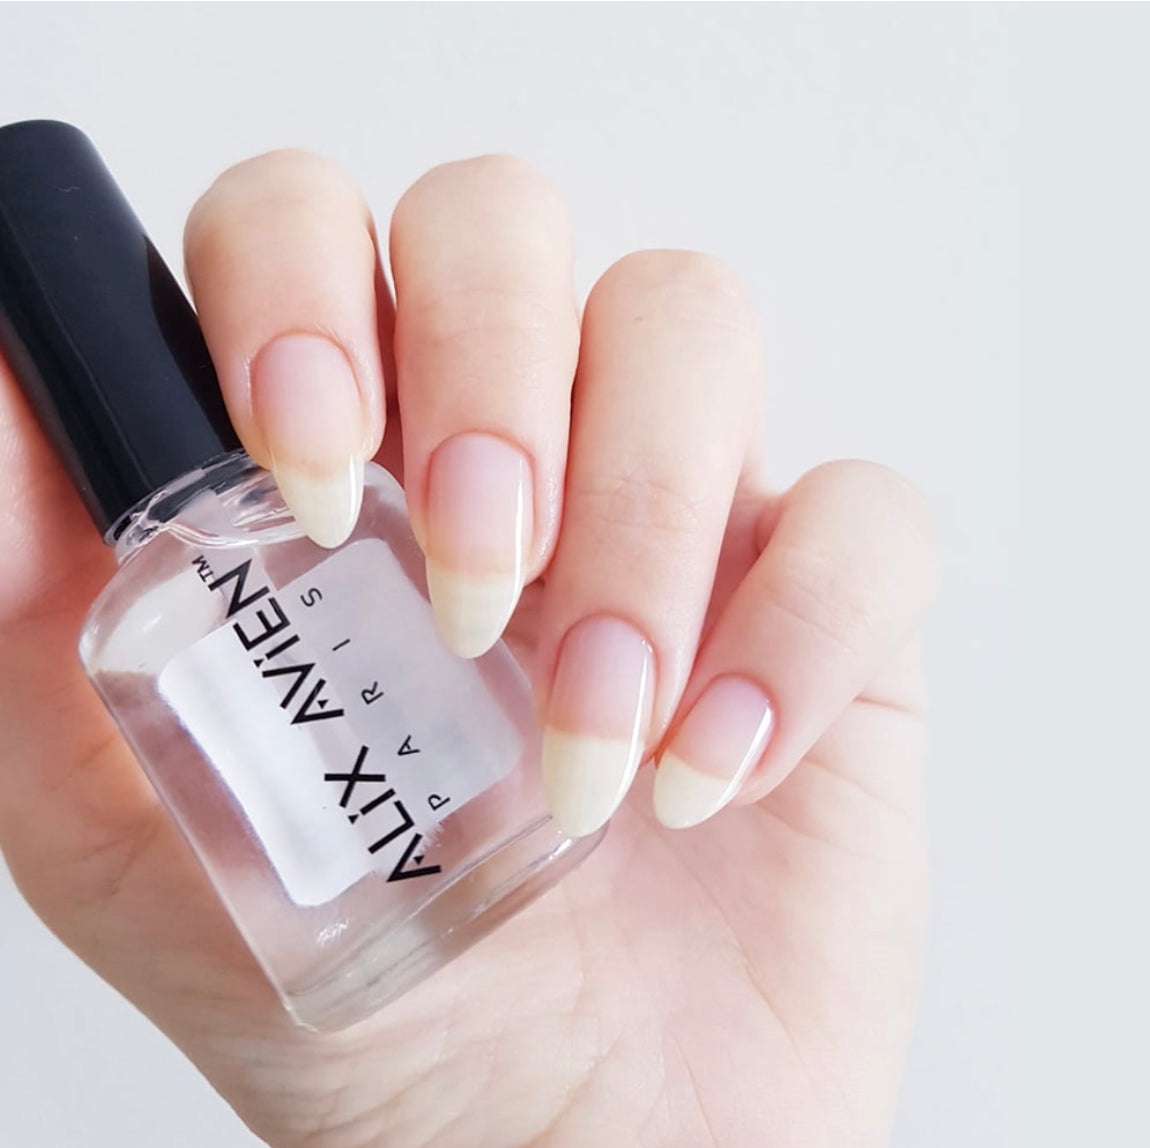 GULGLOW99 Quick-dry Smooth & Perfect Finish Nail Polish transparent - Price  in India, Buy GULGLOW99 Quick-dry Smooth & Perfect Finish Nail Polish  transparent Online In India, Reviews, Ratings & Features | Flipkart.com